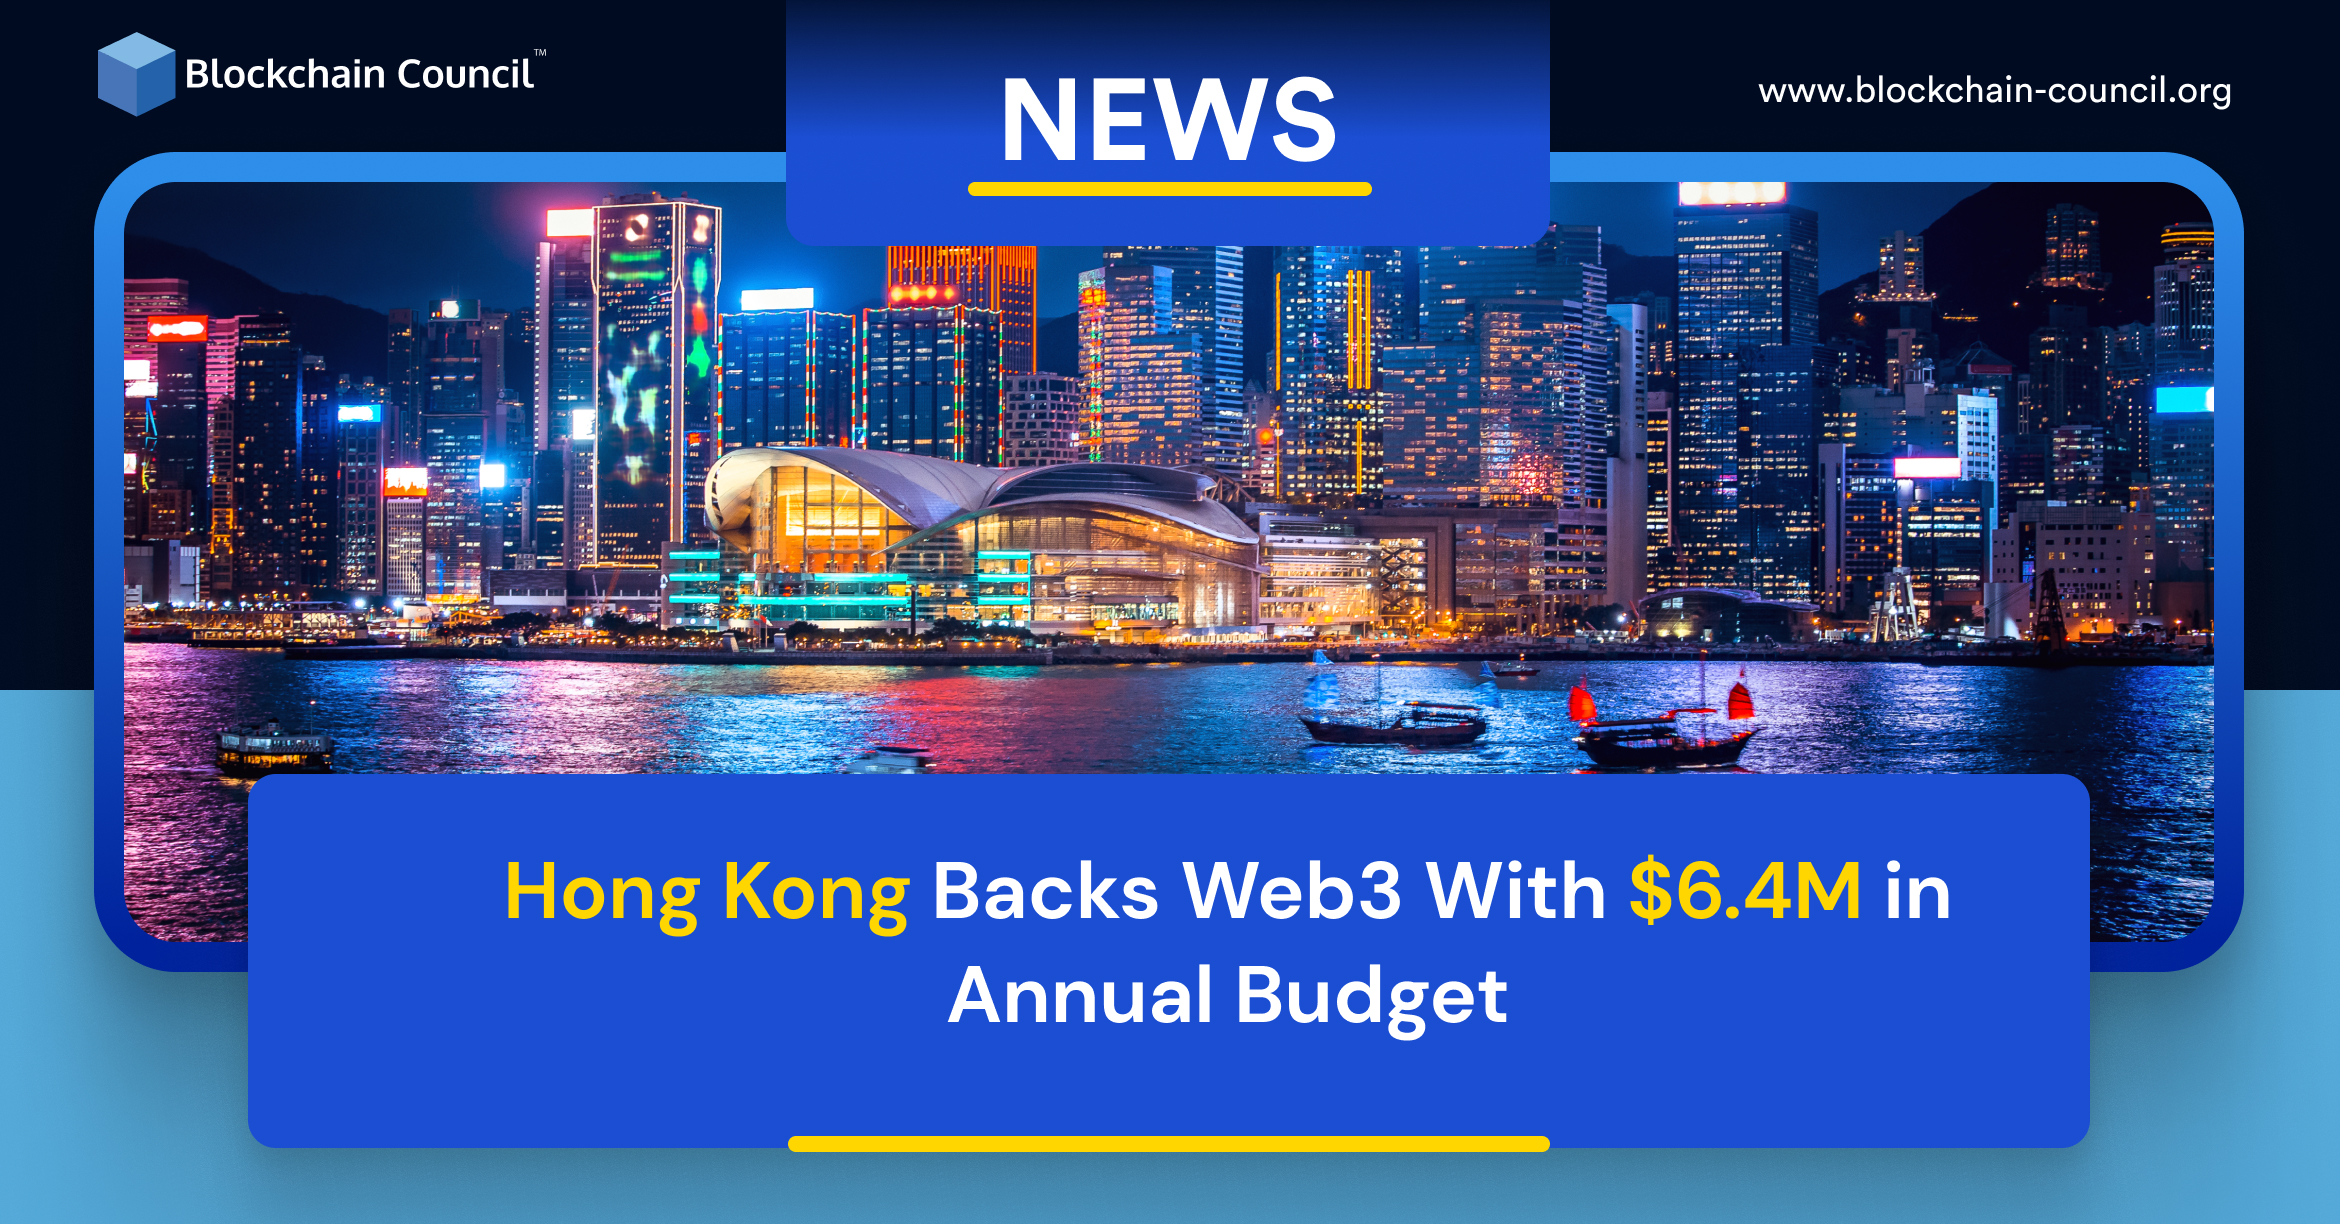 Hong Kong Backs Web3 With $6.4M in Annual Budget